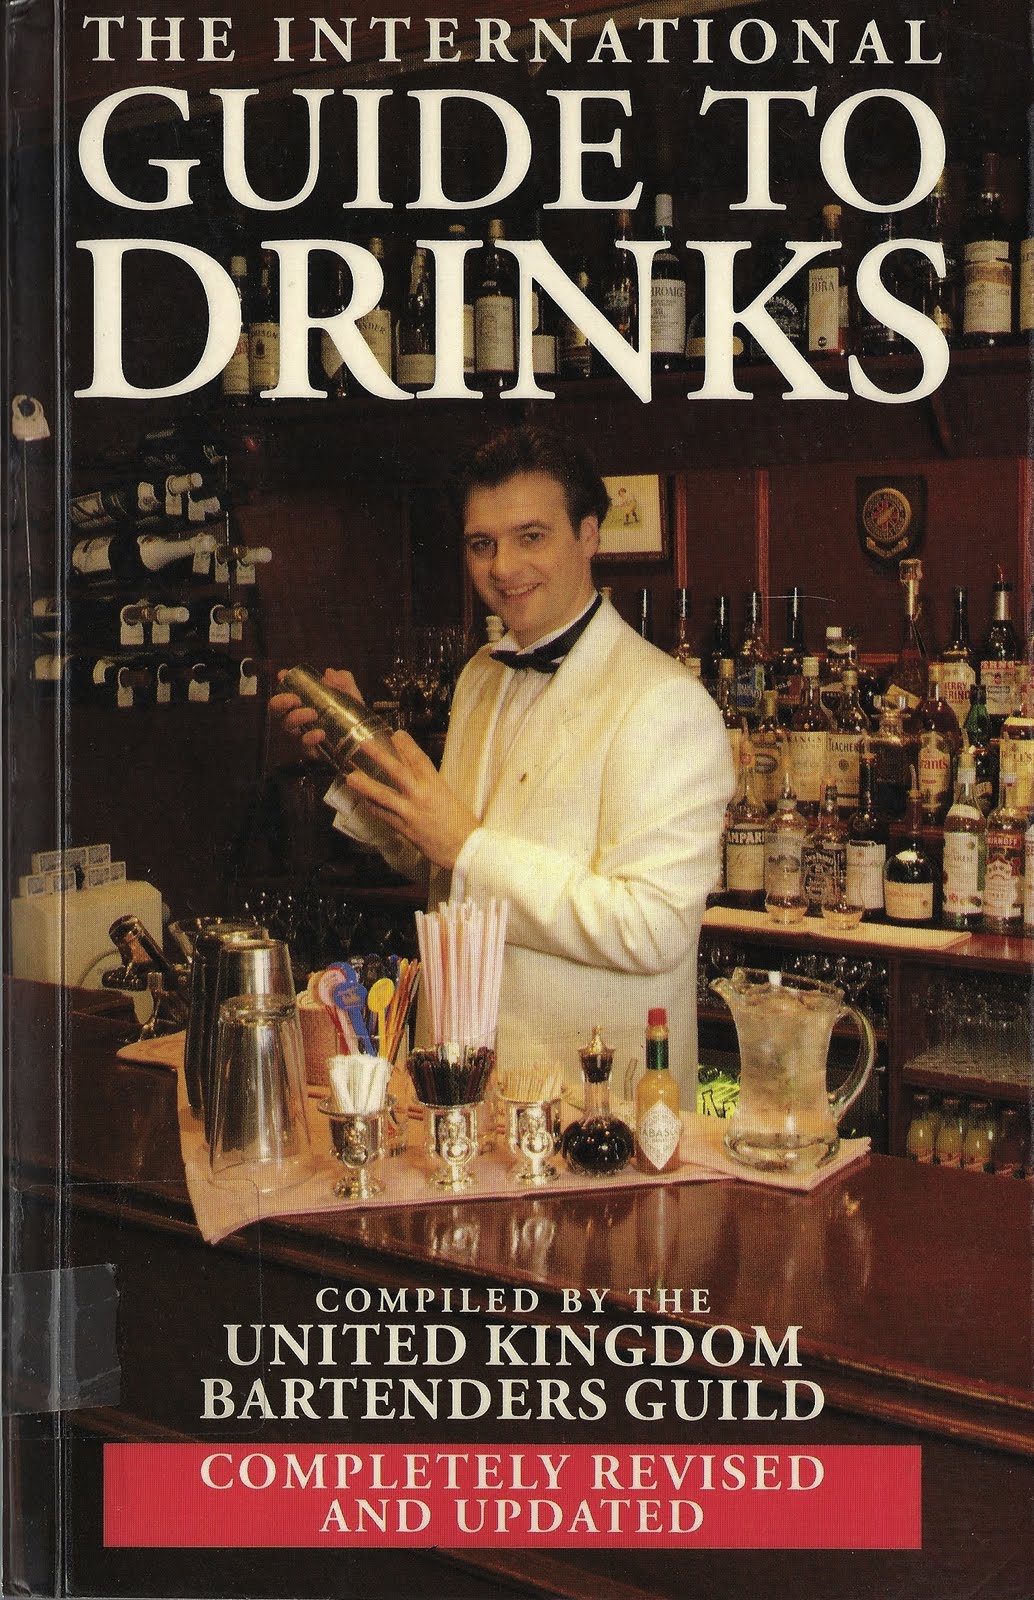 Professional Bartenders Mixology Book [COCKTAIL RECIPES] by TIANO